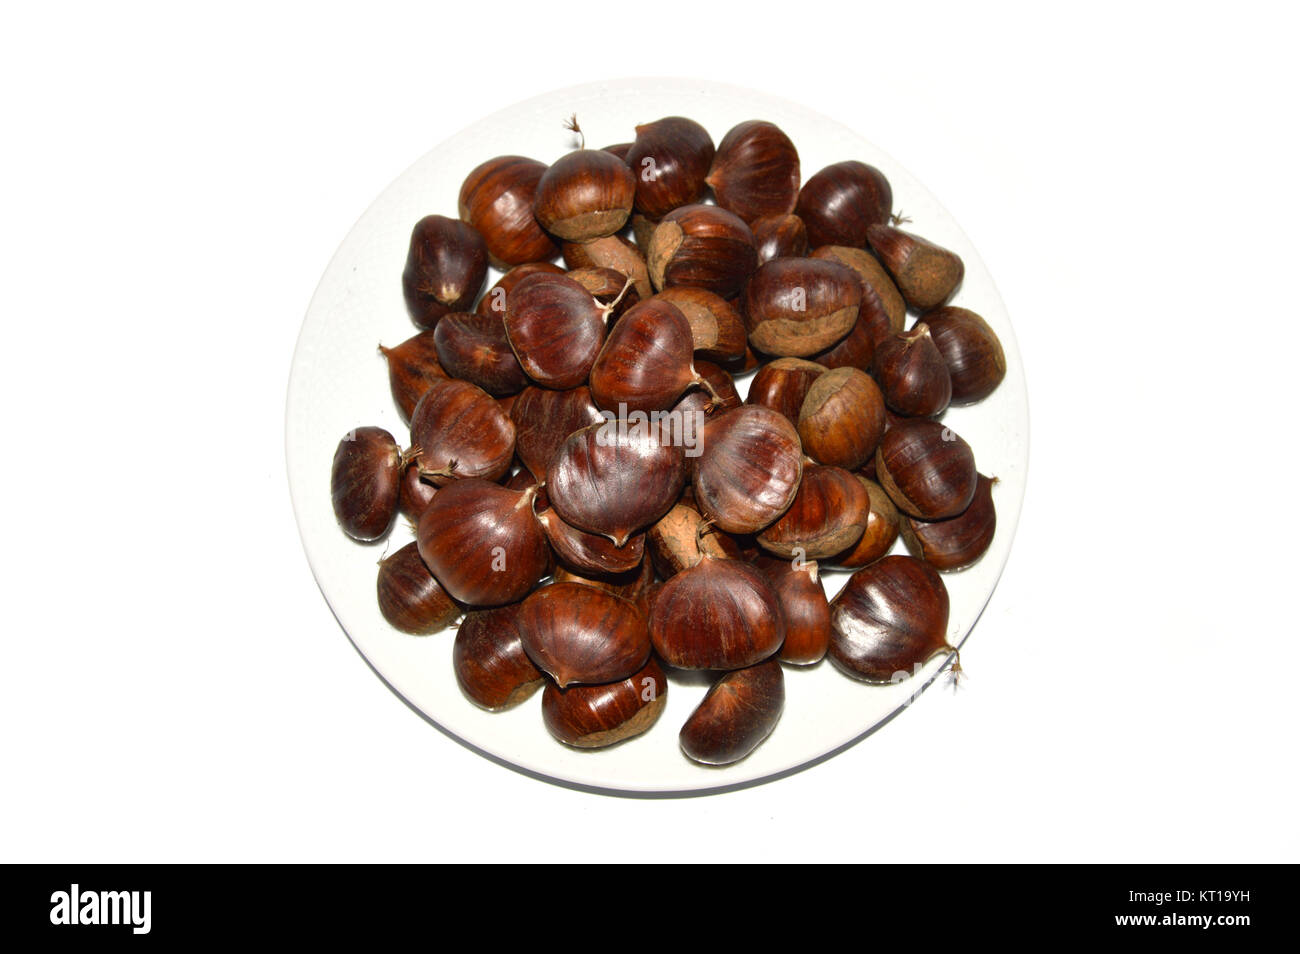 Chestnut pictures Stock Photo